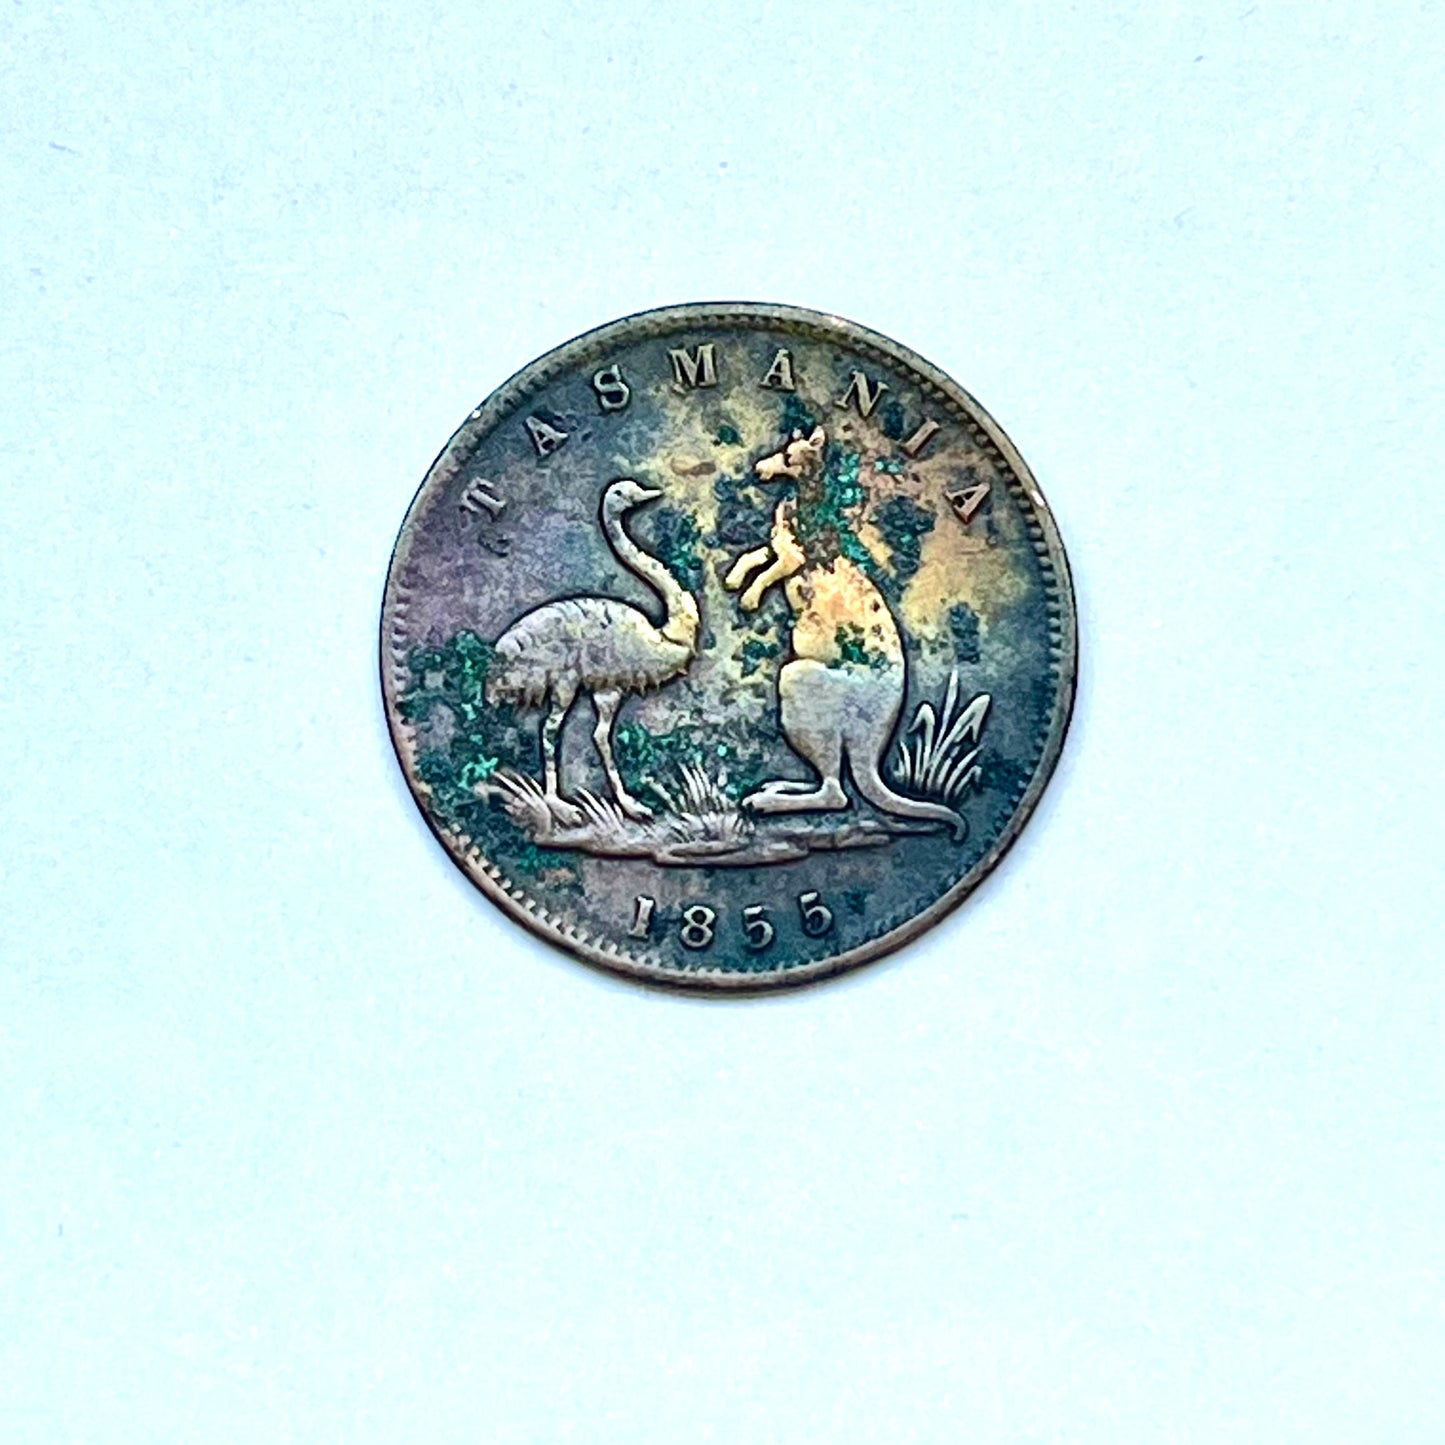 Rare mid 19th century early Australian half penny store token for Lewis Abrahams Draper, Liverpool Street Hobart Town, dated 1855.